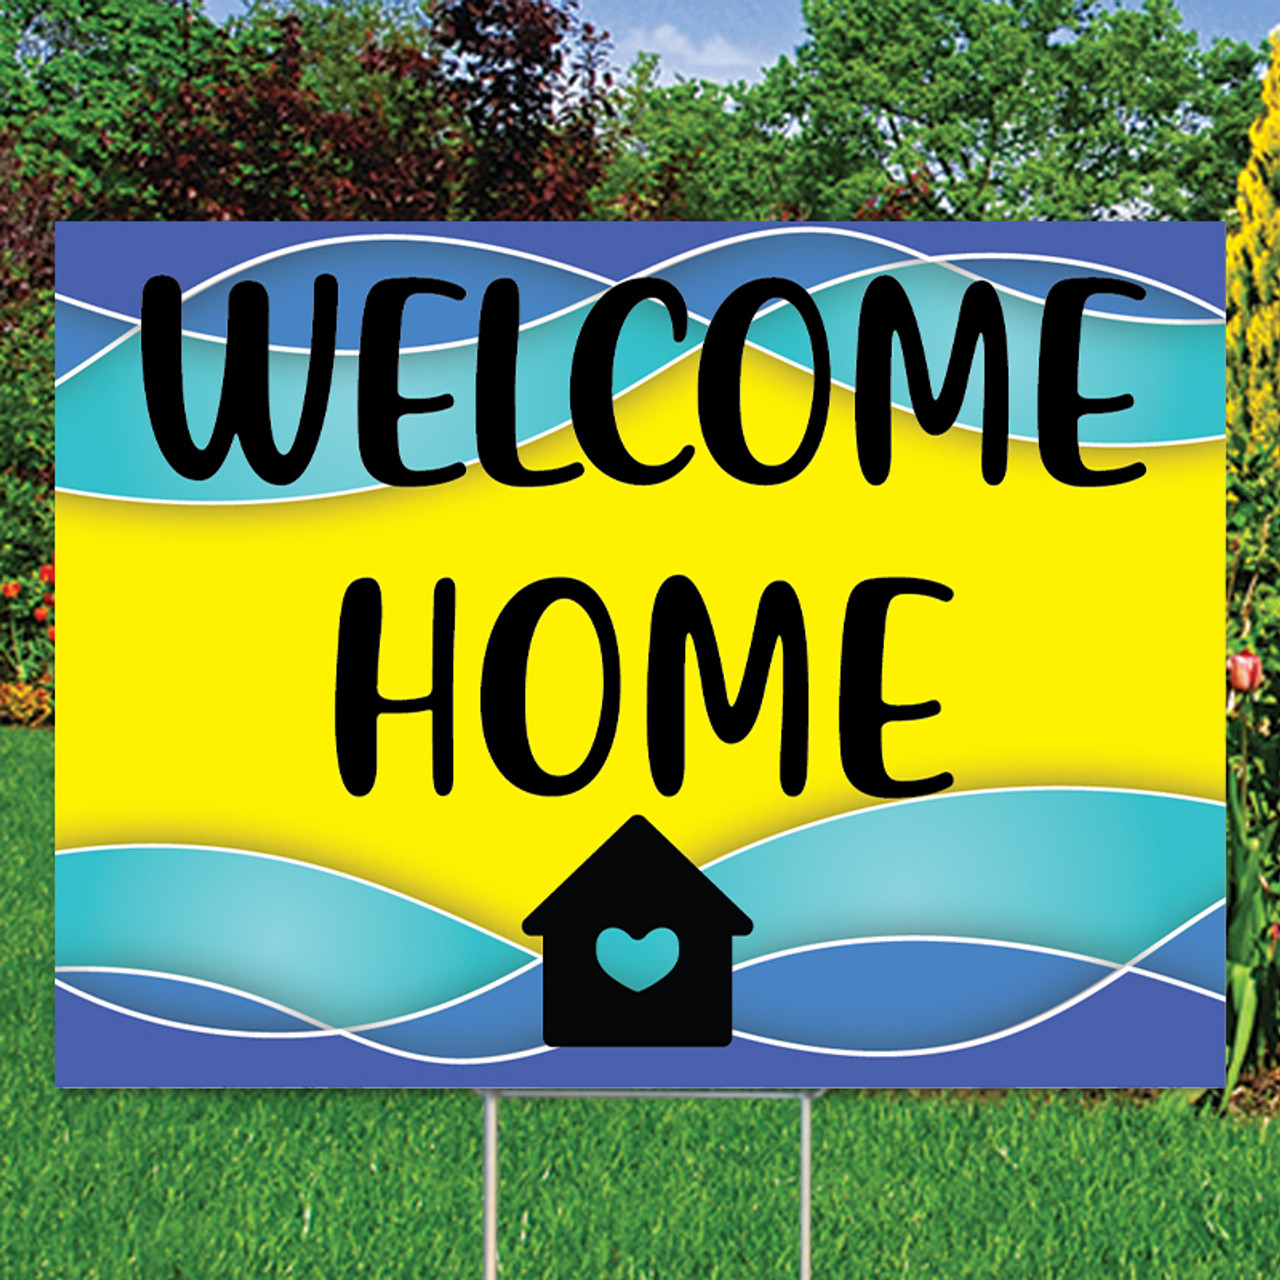 Heart Home - Vertical Flag and Yard Sign Marketing Bundle